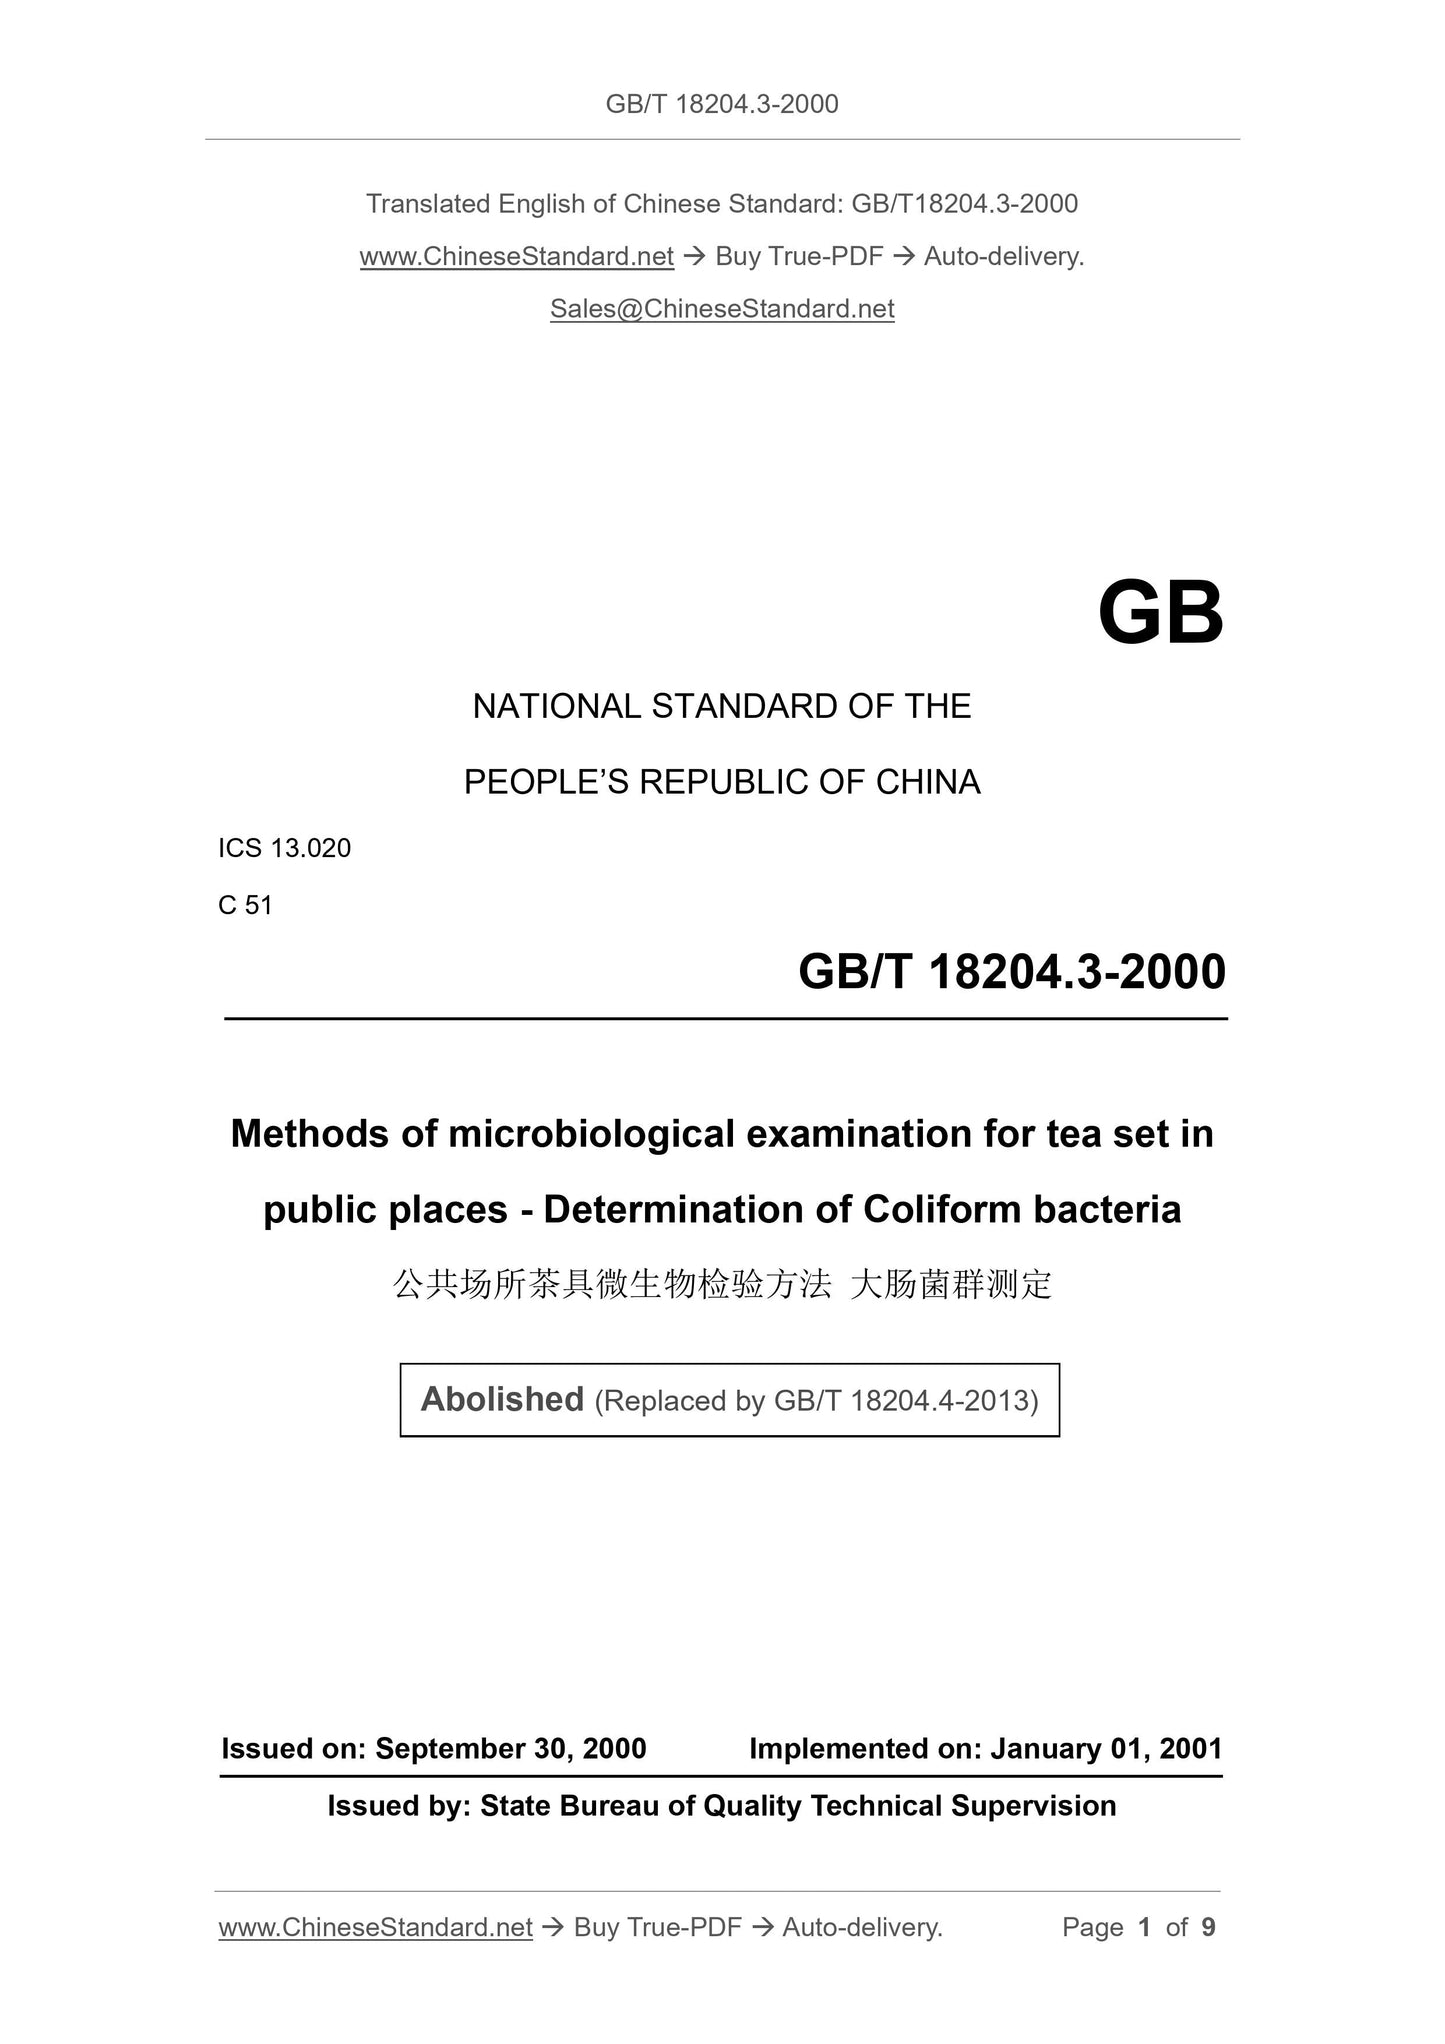 GB/T 18204.3-2000 Page 1